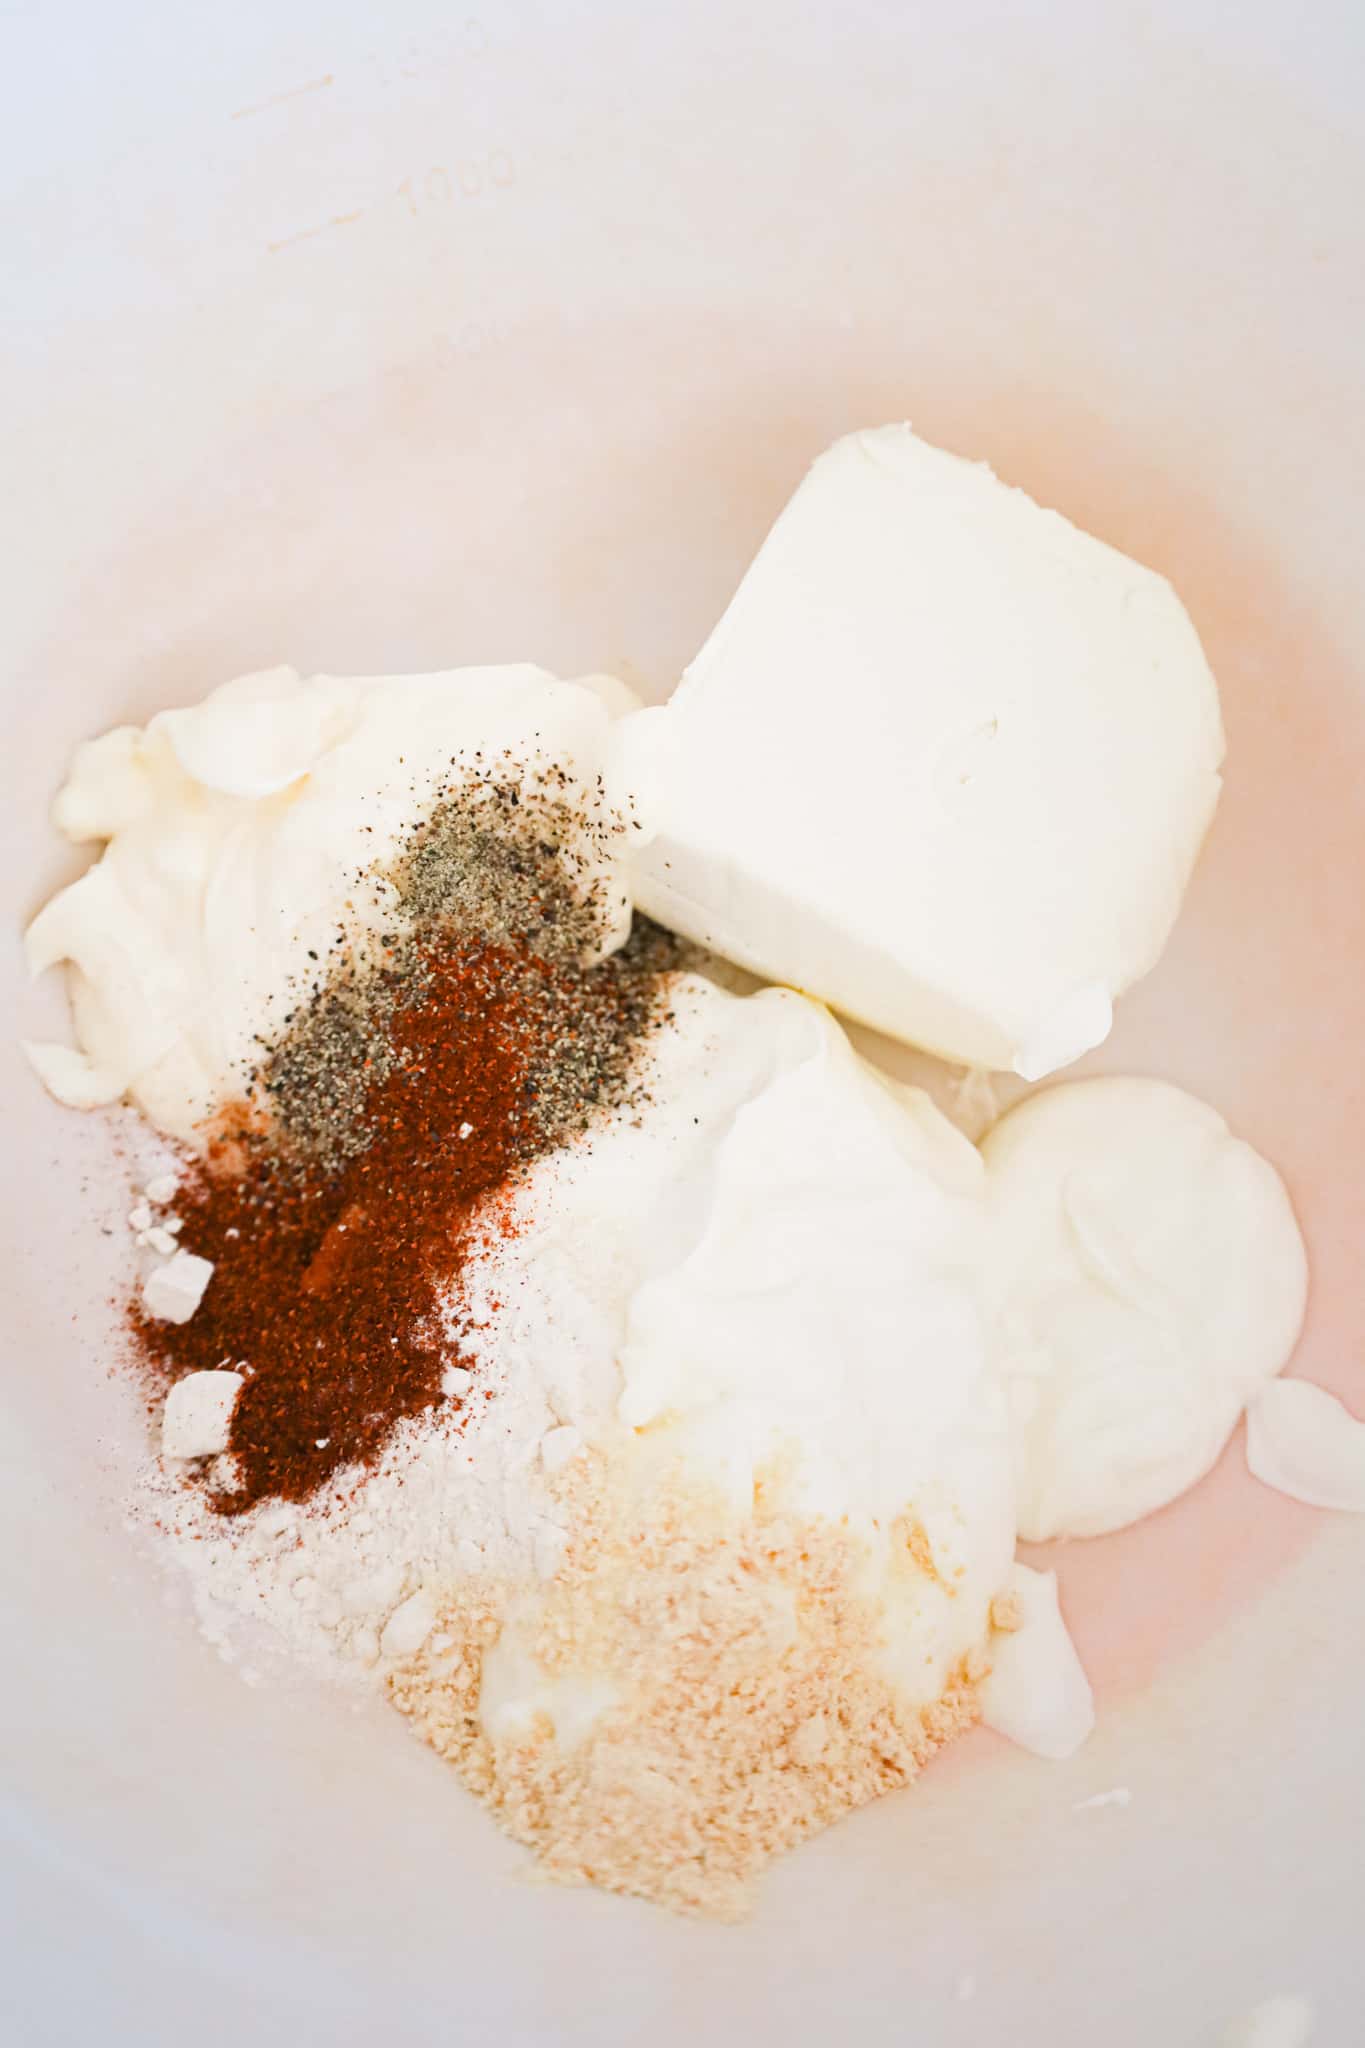 cream cheese, sour cream, mayo and spices in a mixin gbowl